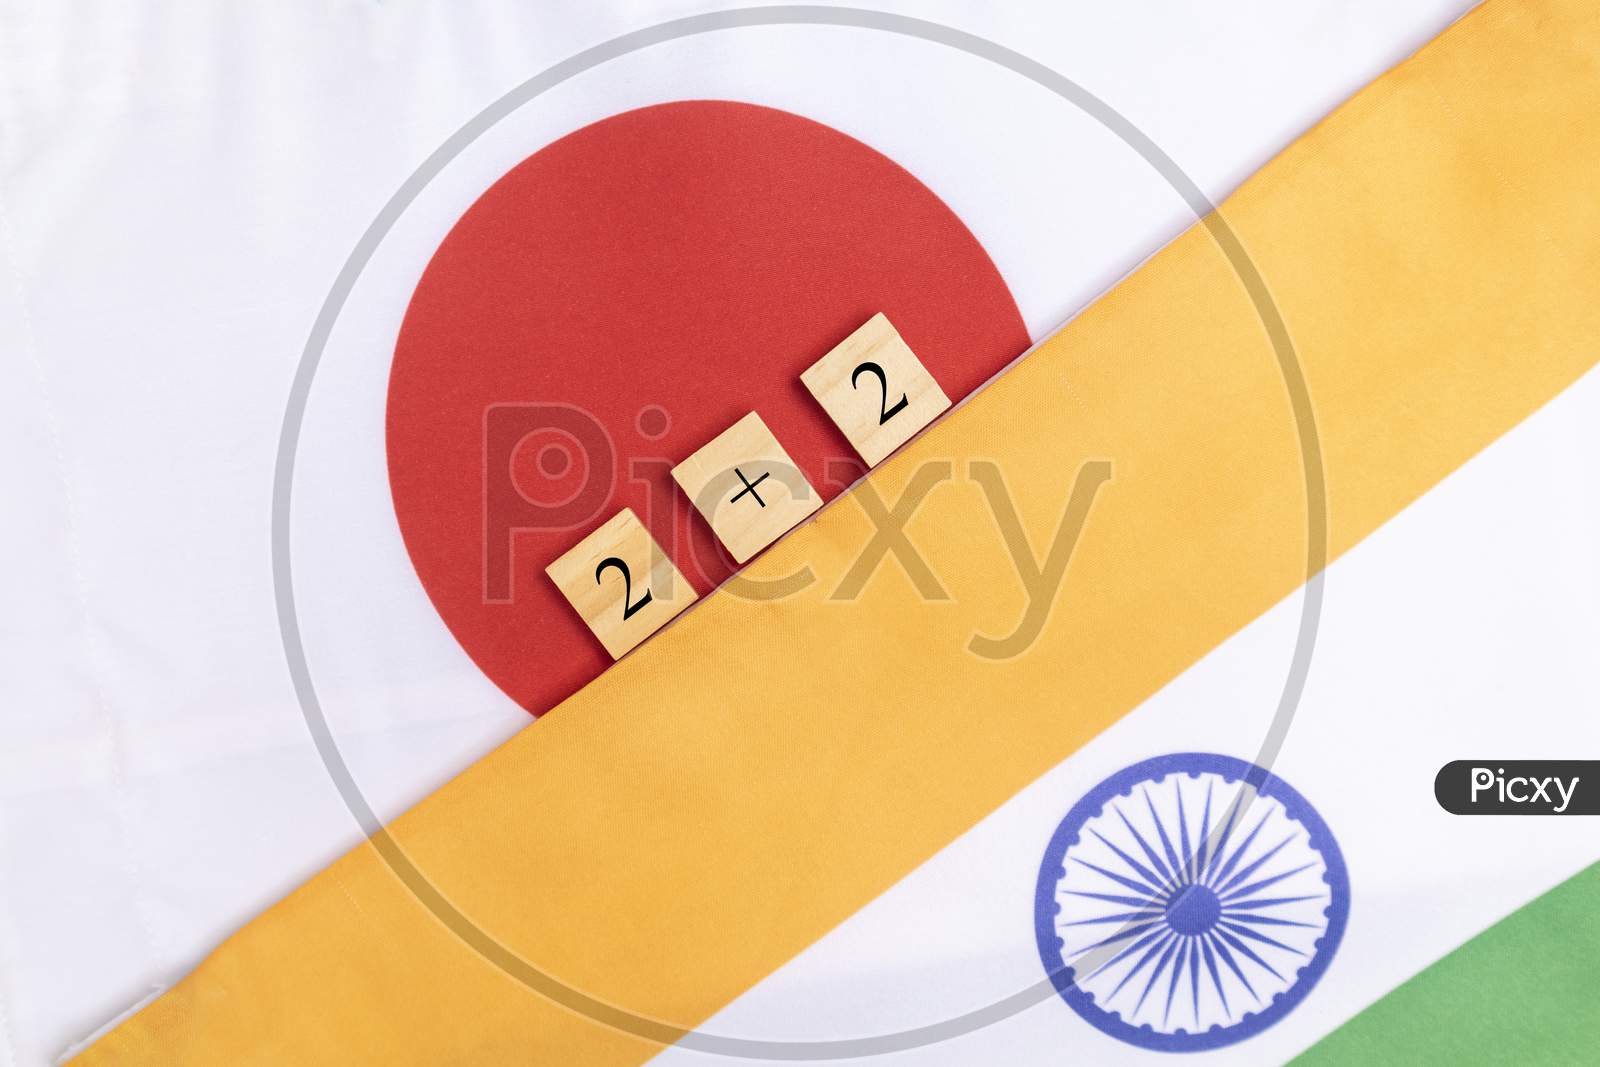 Concept Of Bilateral Relationship Between Two Countries Showing With Two Flags: India And Japan 2 Plus 2 Dialogue